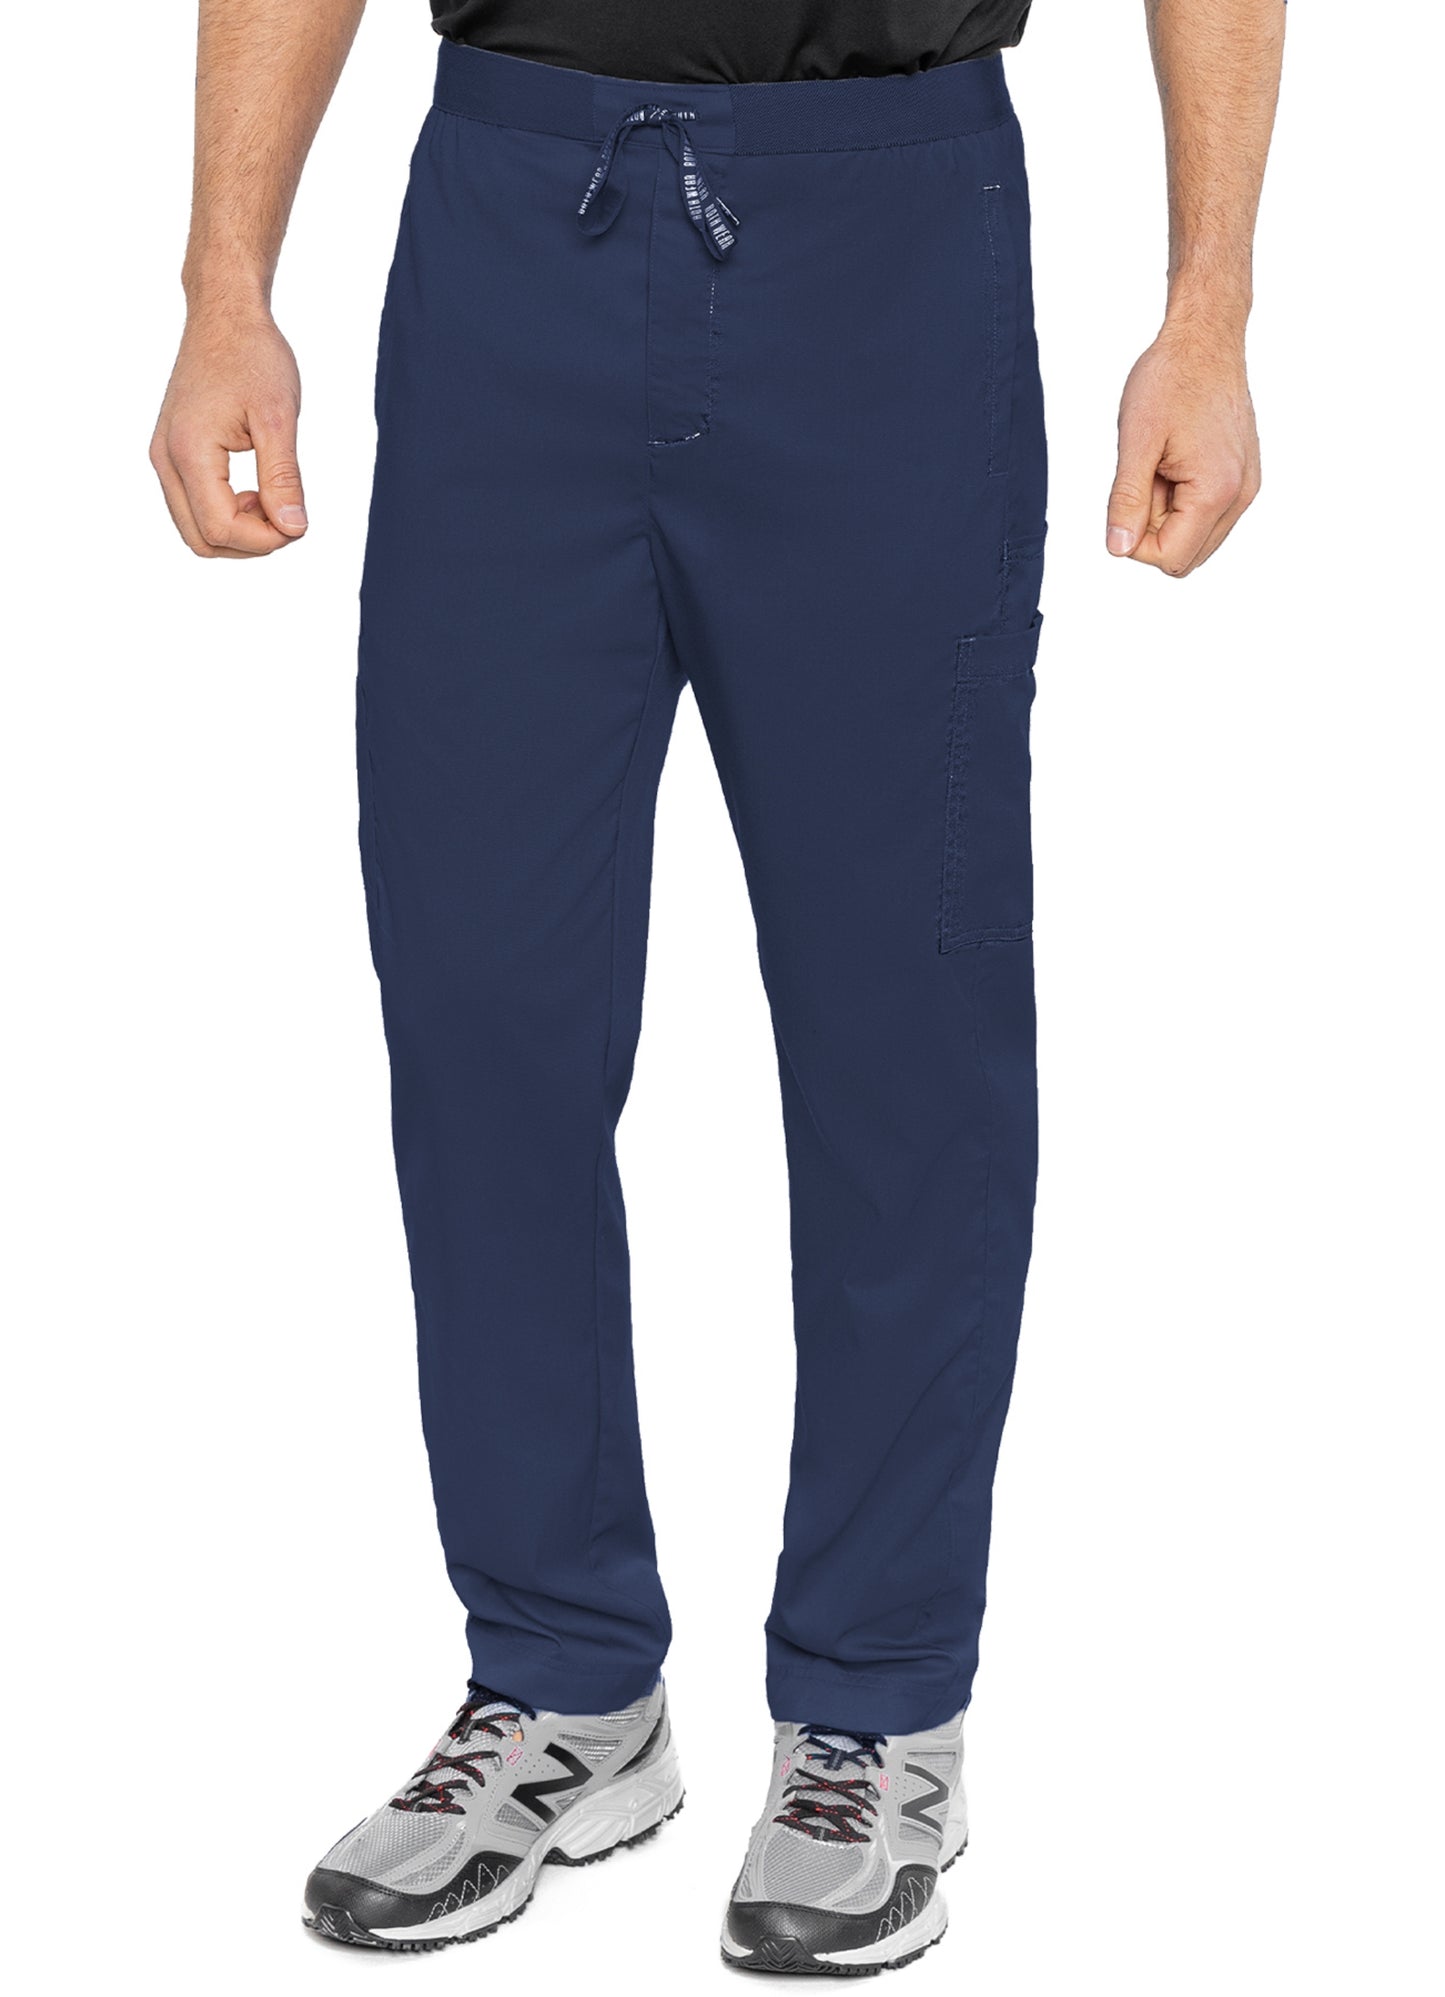 Med Couture Hutton Straight Leg Pant